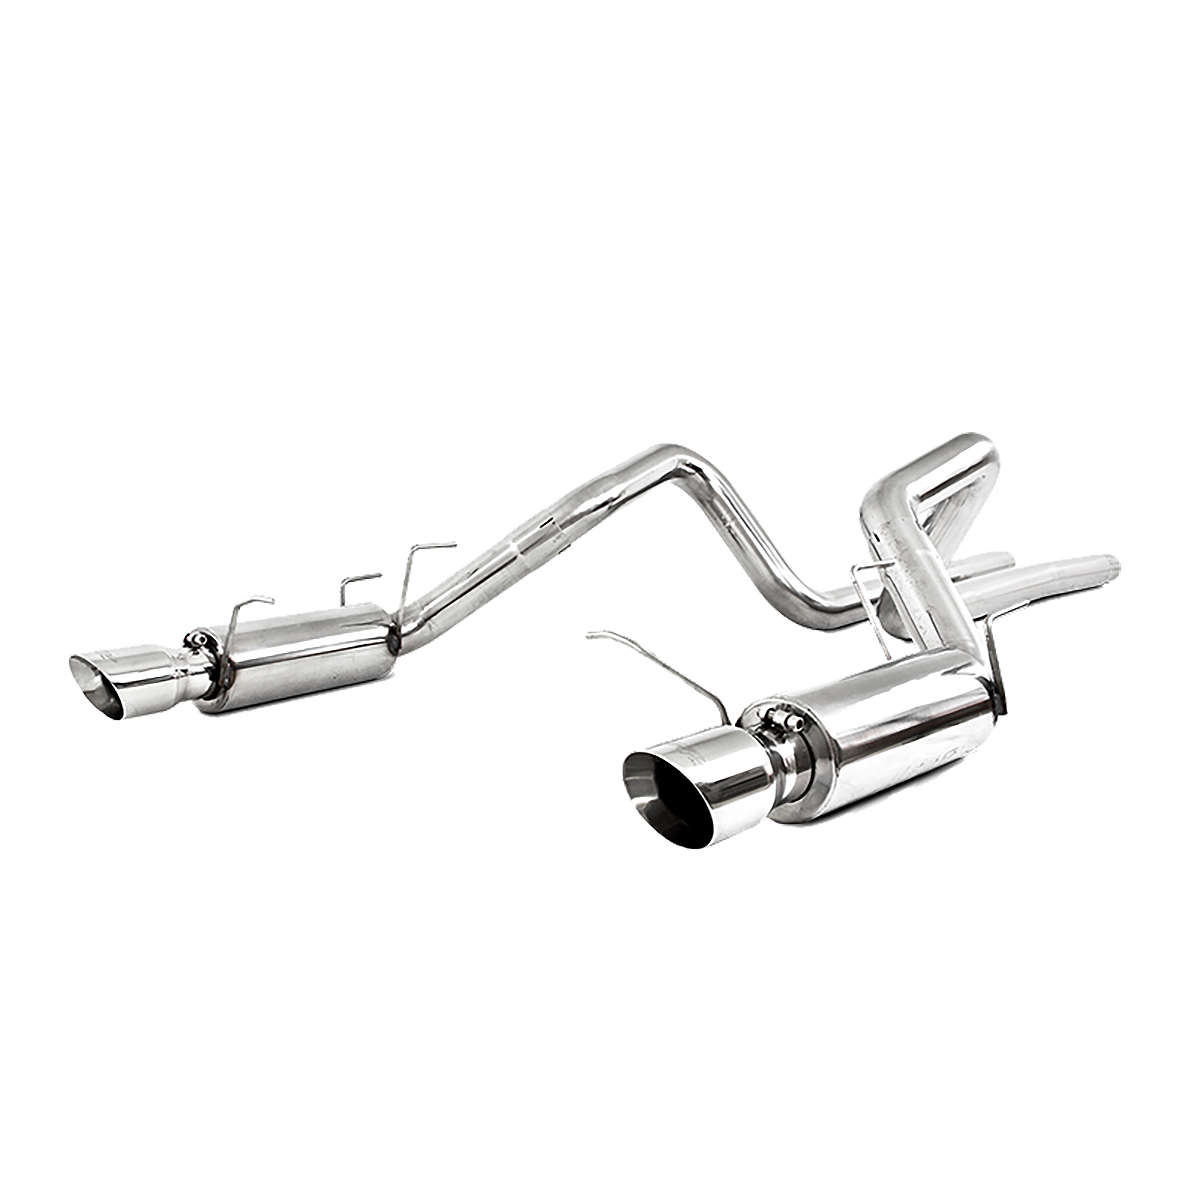 MBRP - MBRP 3 Inch Cat Back Exhaust System For 11-12 Ford Shelby GT500 Dual Split Rear Race Version 4.5 Inch Tips T304 Stainless Steel S7260304